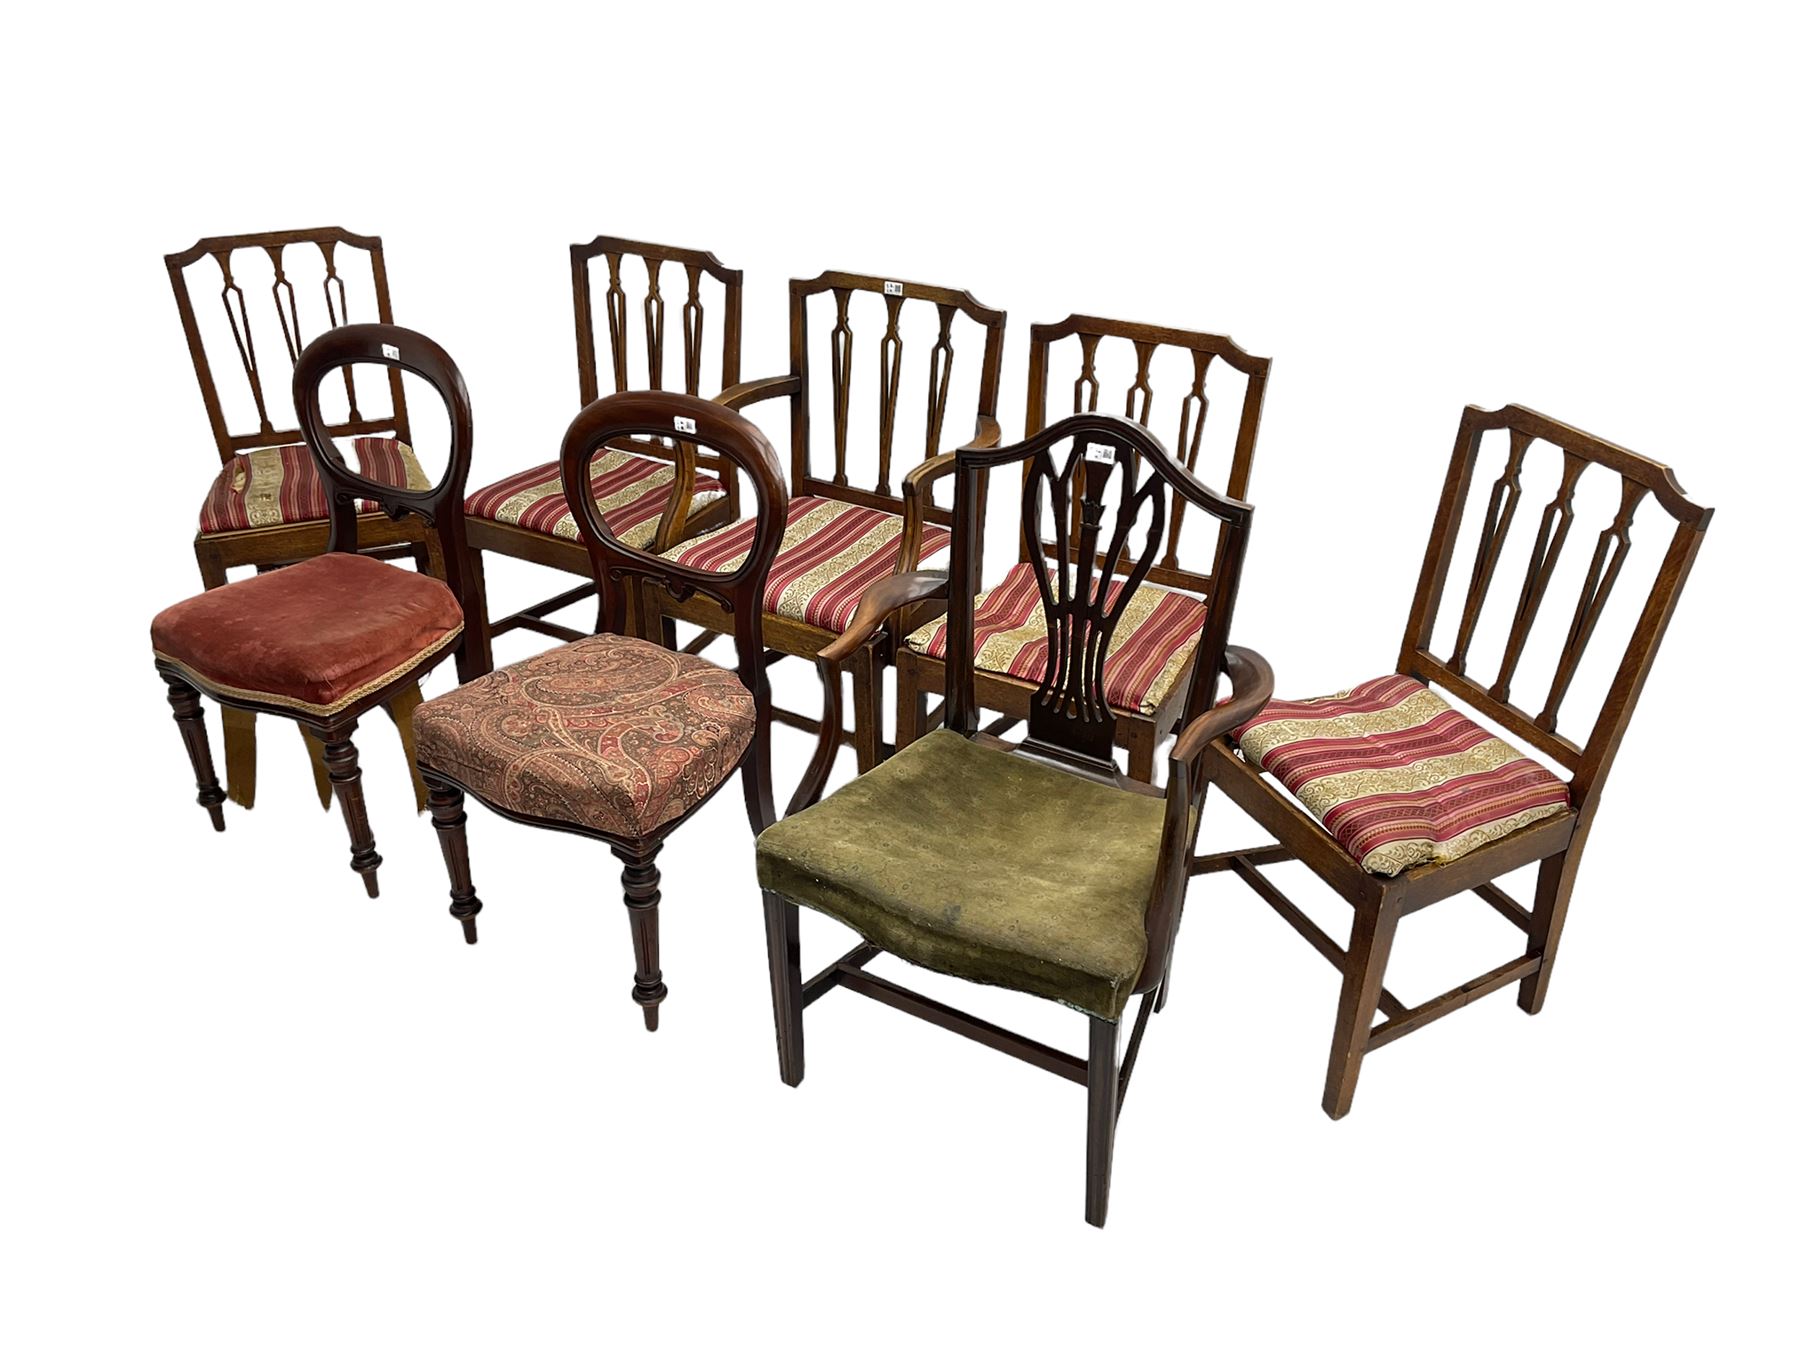 Four Victorian rosewood dining chairs - Image 4 of 7